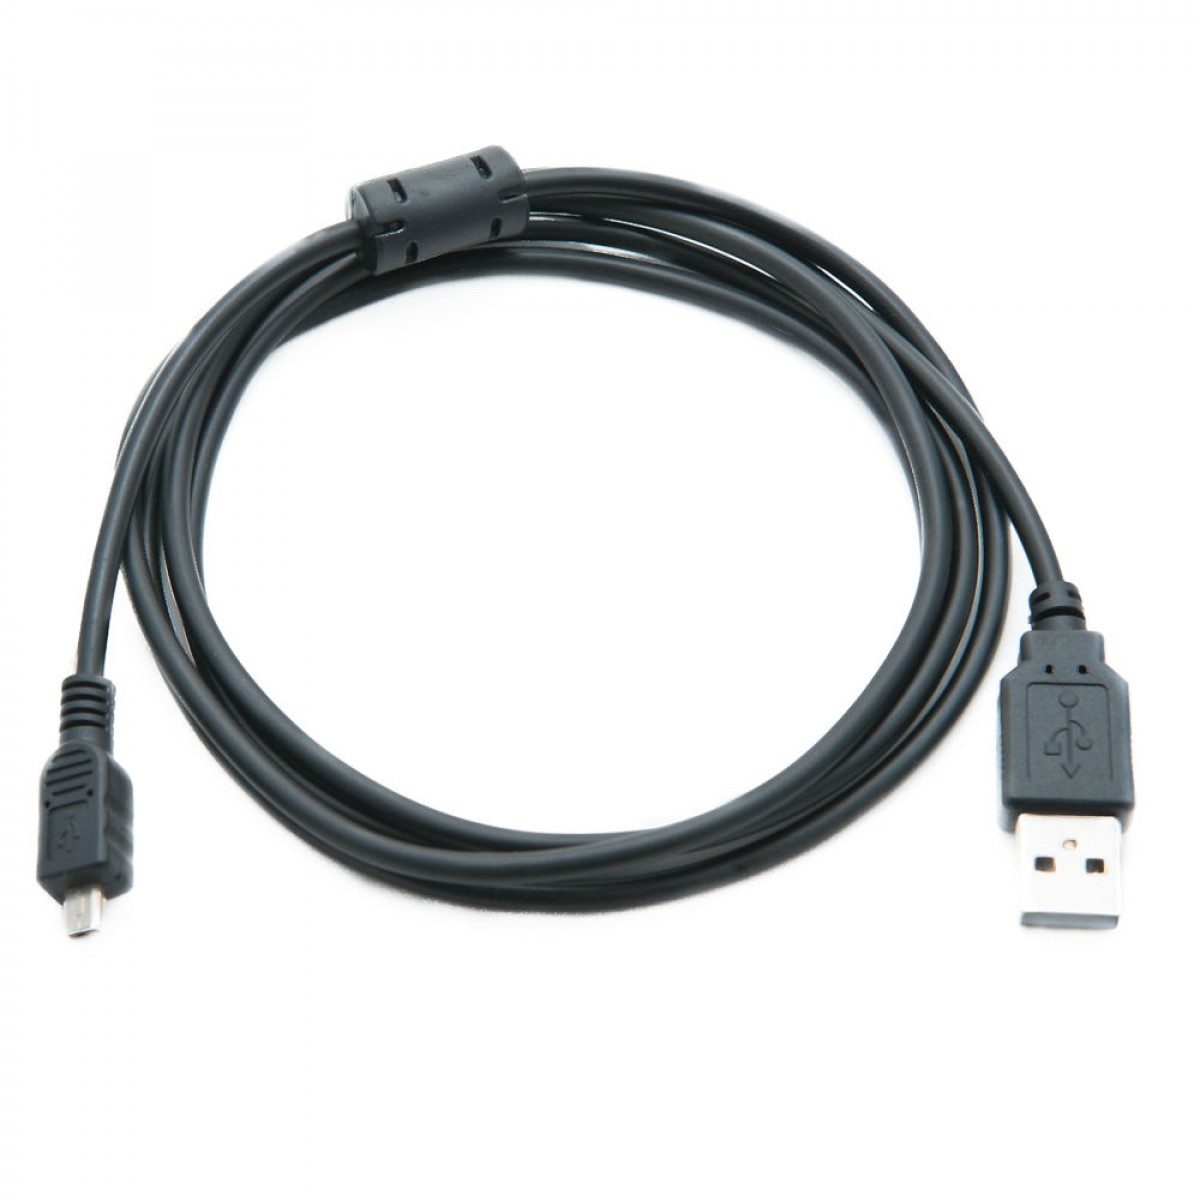 DMC-GX1s DMC-G3 DMC-G5W DMC-G2 MaxLLTo 5ft Extra Long Replacement USB Sync Data Cable Cord for Panasonic Lumix DMC-GX1 DMC-GX1k DMC-G5P DMC-G3s DMC-G2P DMC-G3gk DMC-G2W DMC-G2X DMC-G5 